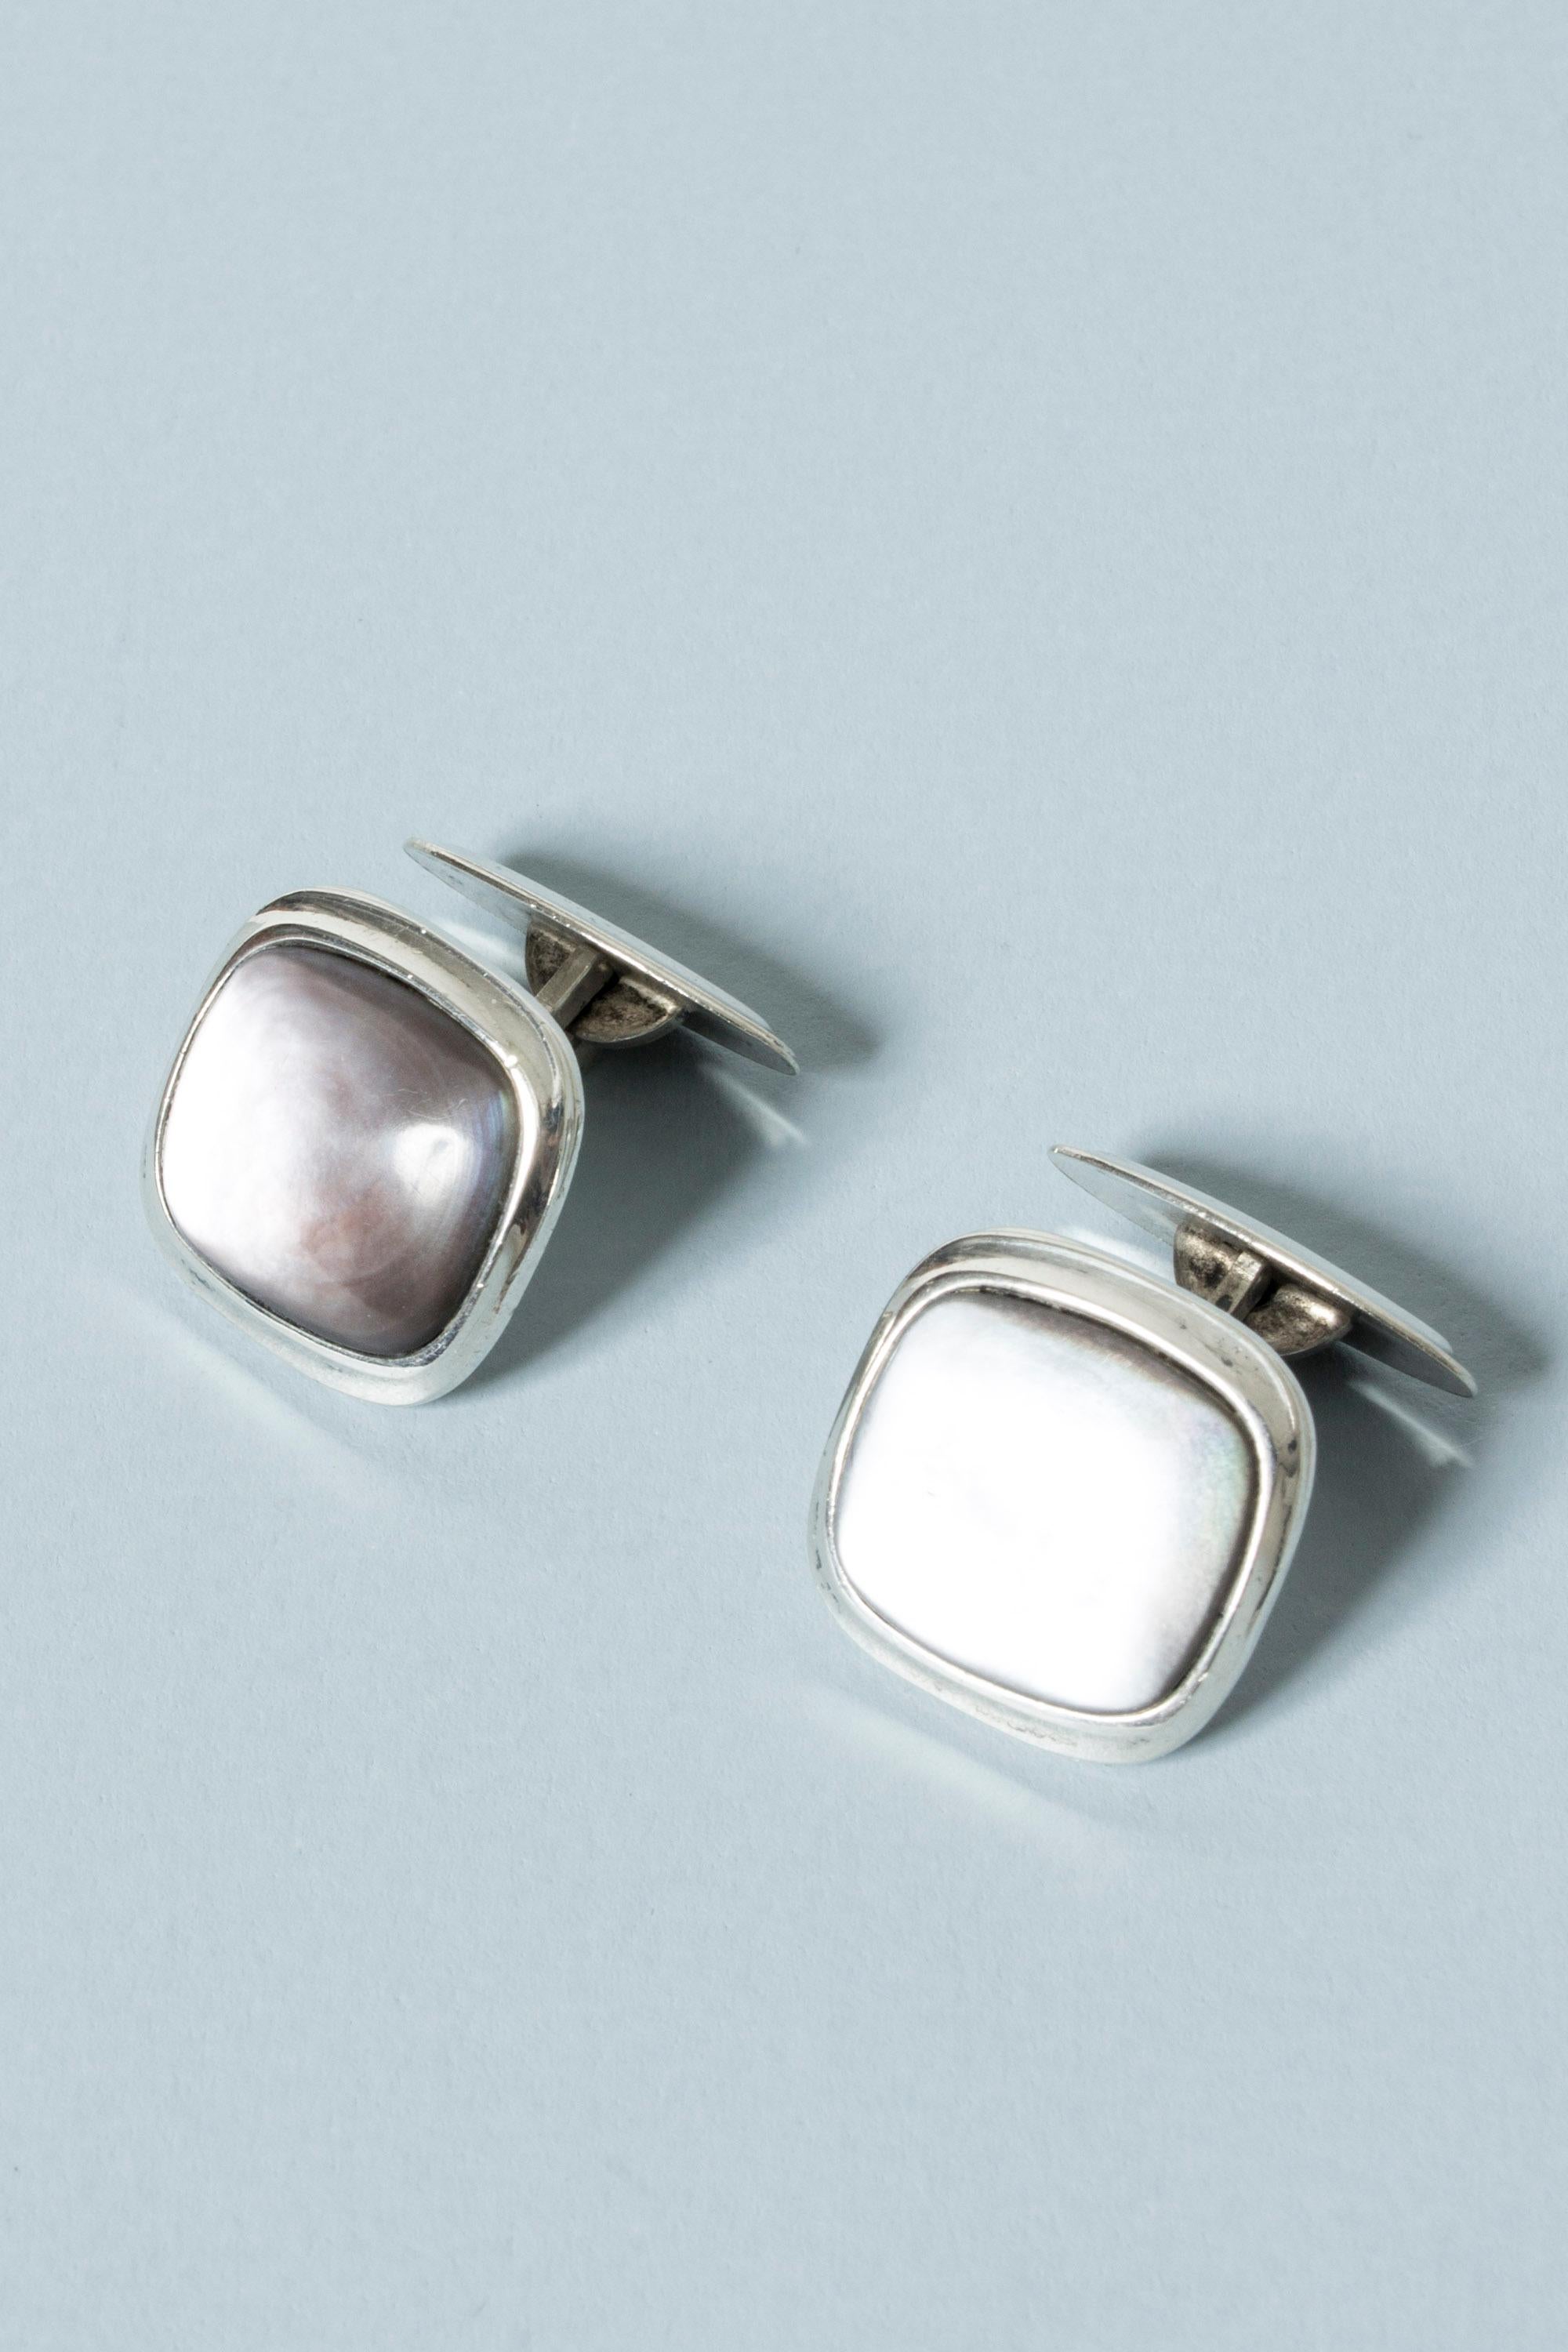 Pair of very elegant Scandinavian midcentury cufflinks with enigmatic moonstones. The stones have a depth and inner glow that make them look almost like pearl.